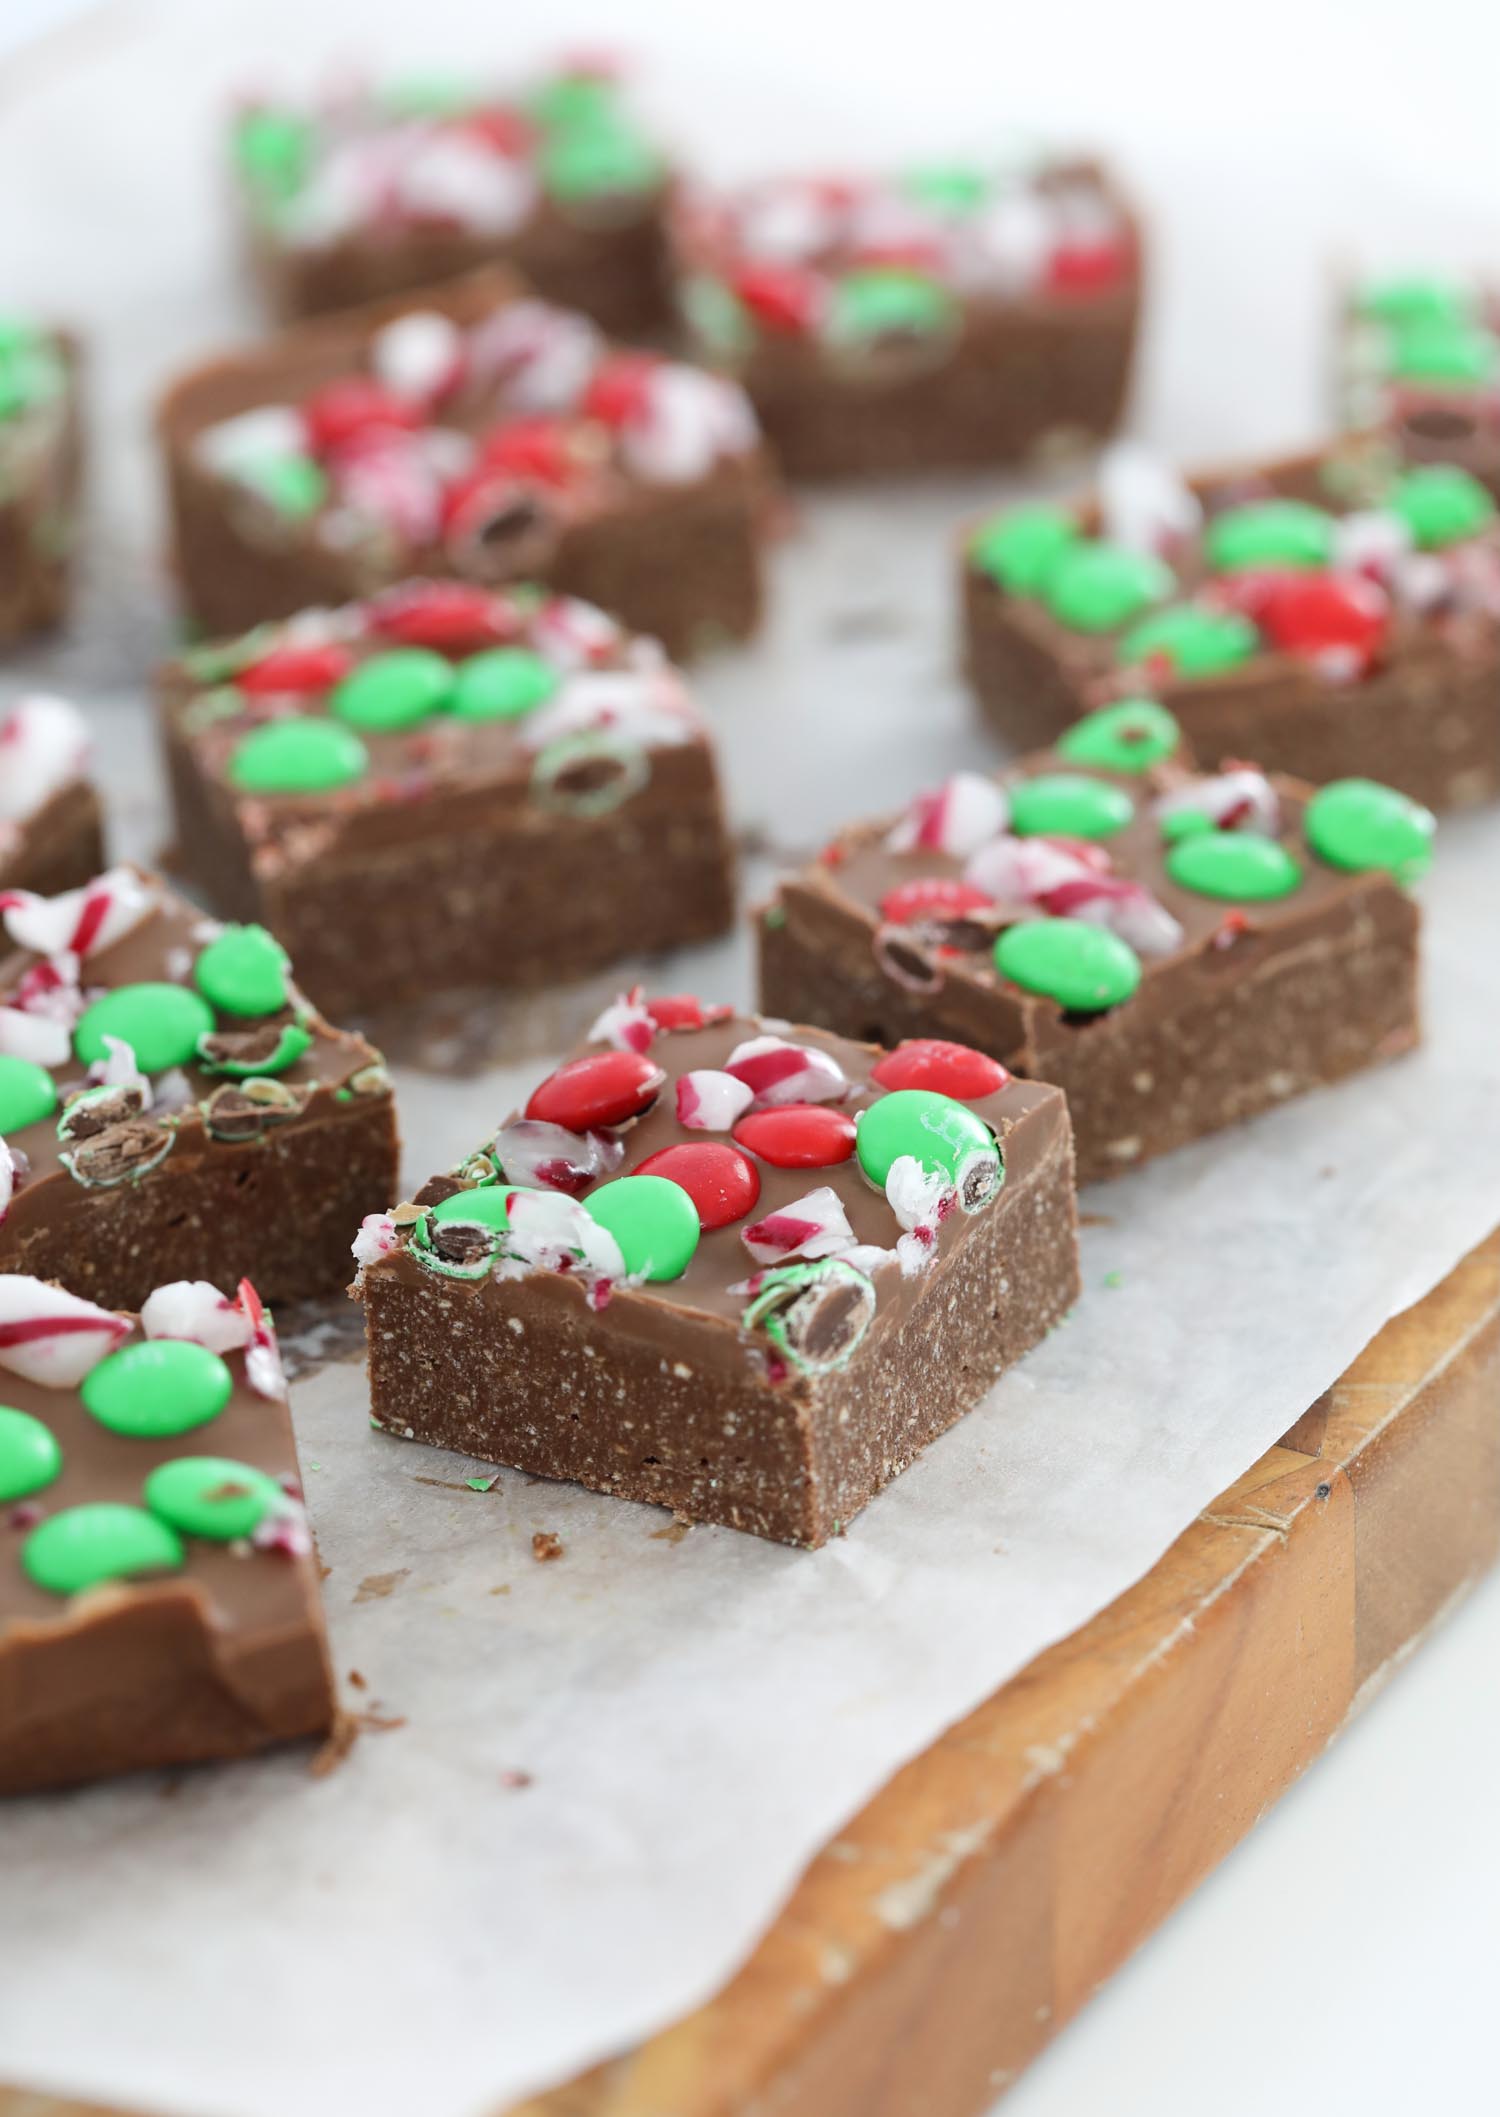 Squares of a chocolate slice on a wooden board topped with red and green M&M's.